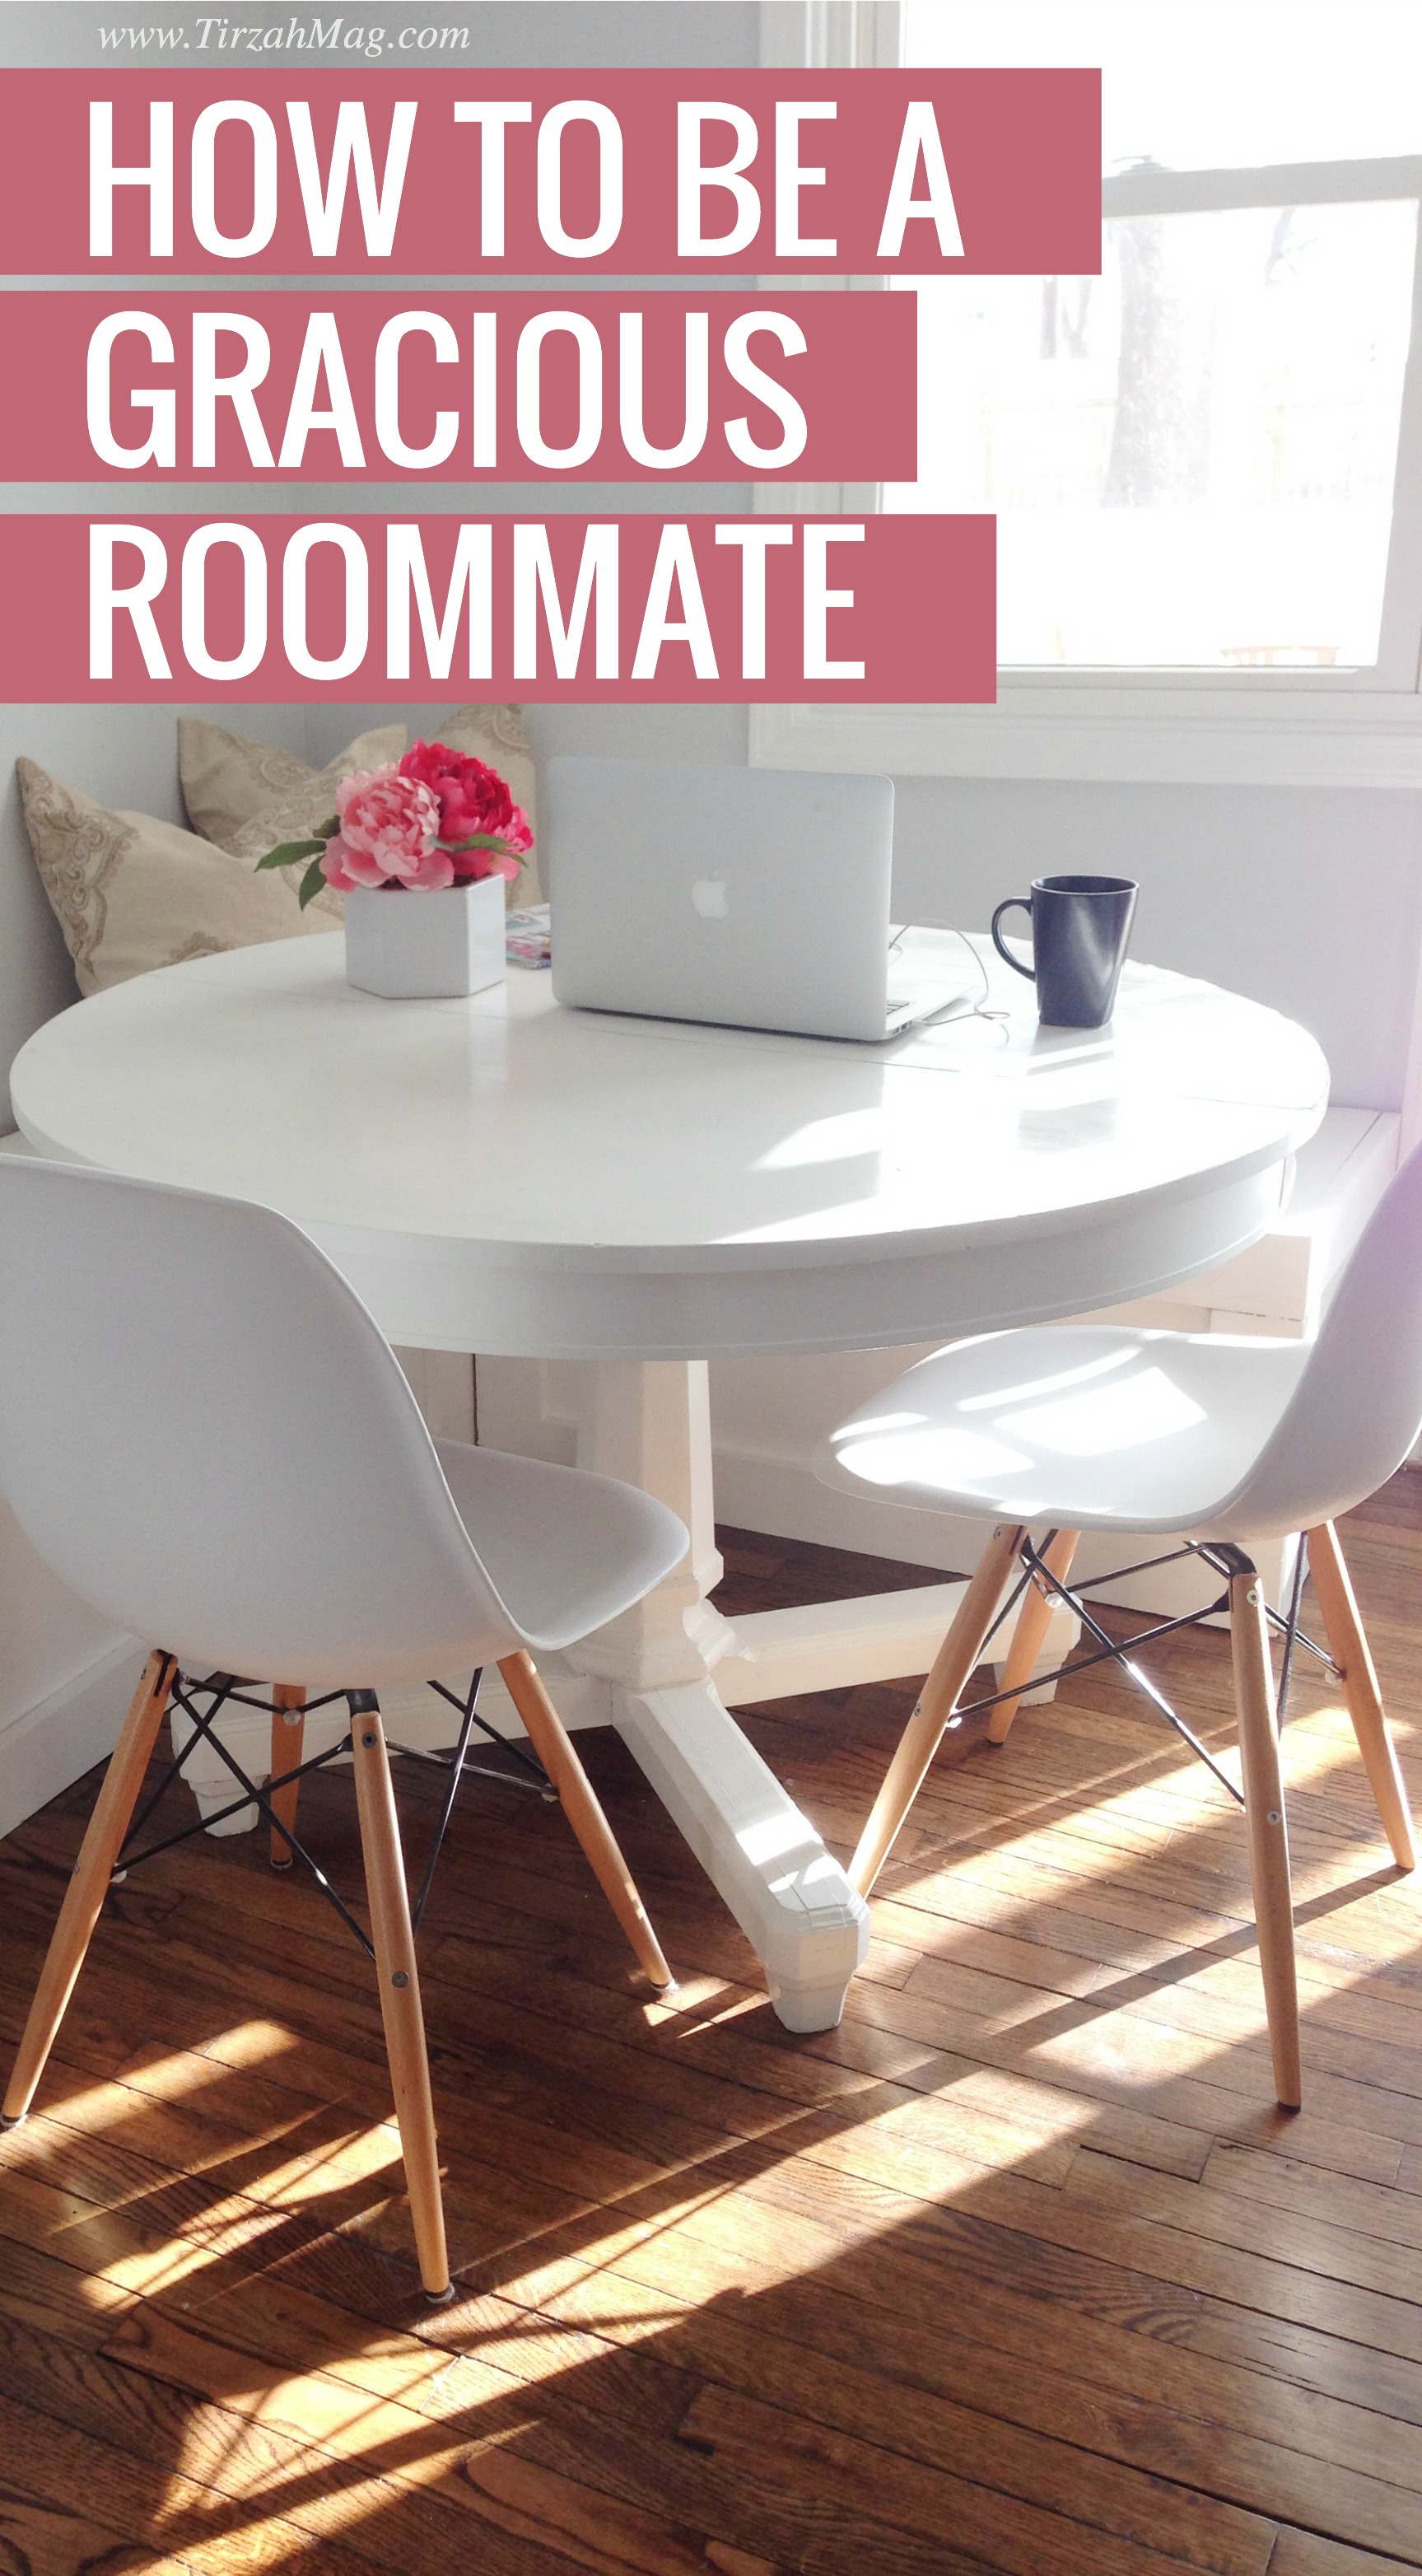 Whether you're living in the dorms or moving in for the first time with your significant other, these tips are gold